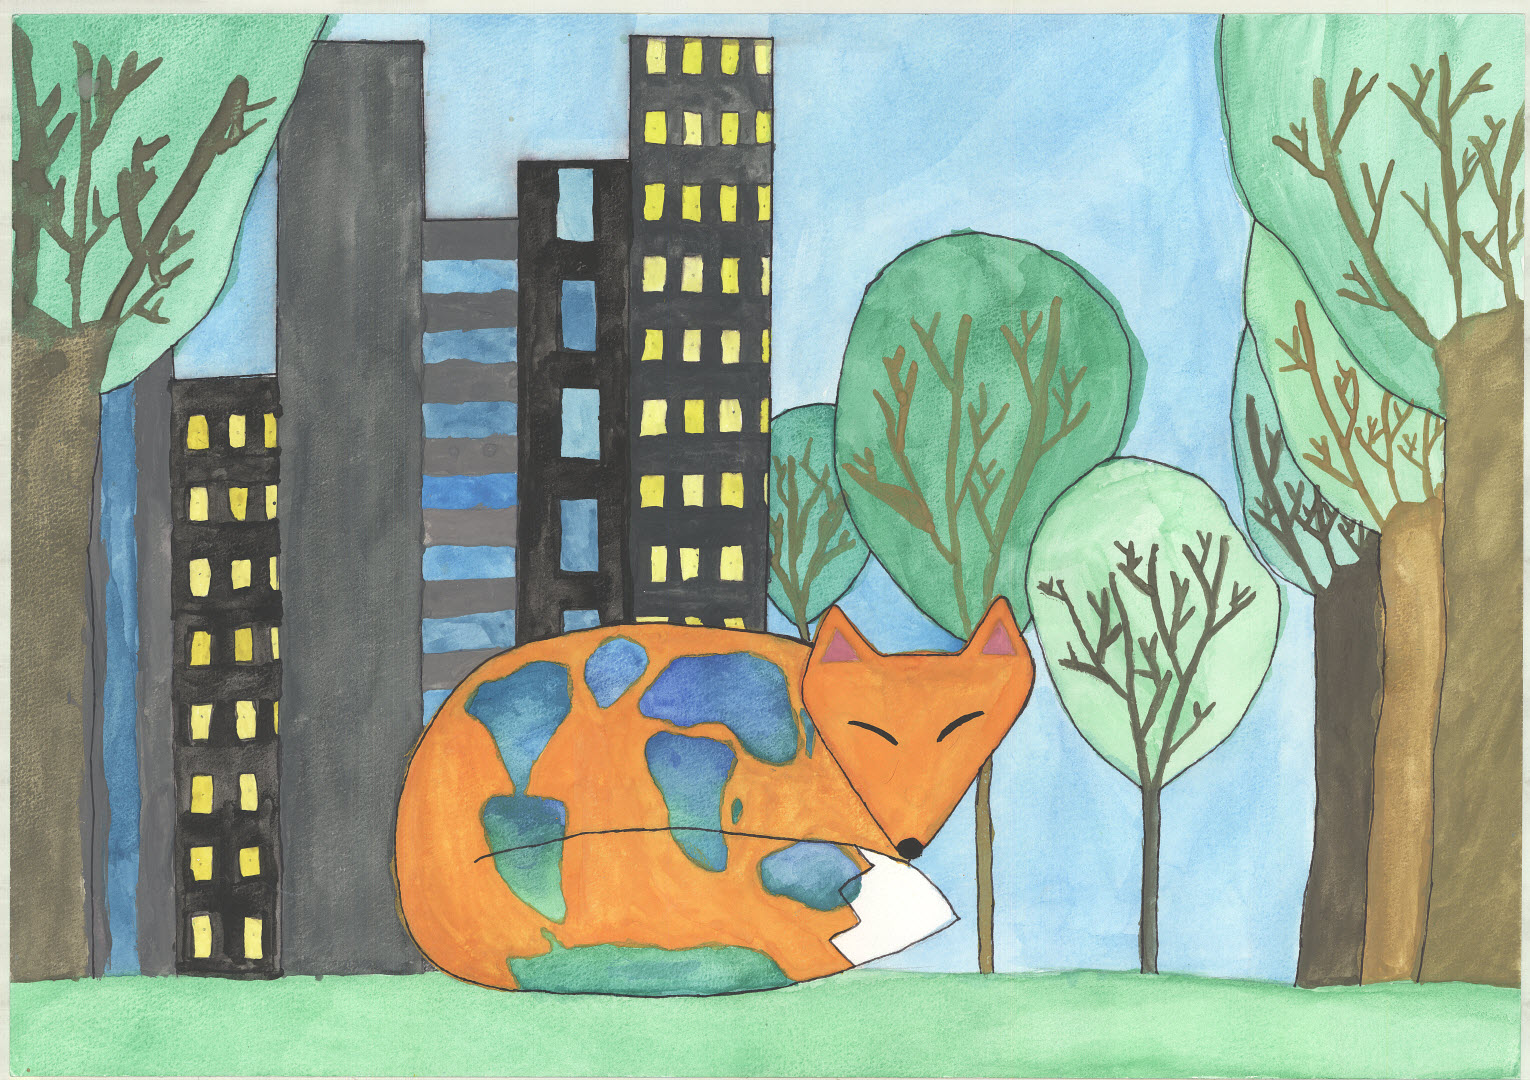 Shows a fox with the continents on its body, with trees protected in a bubble and city buildings